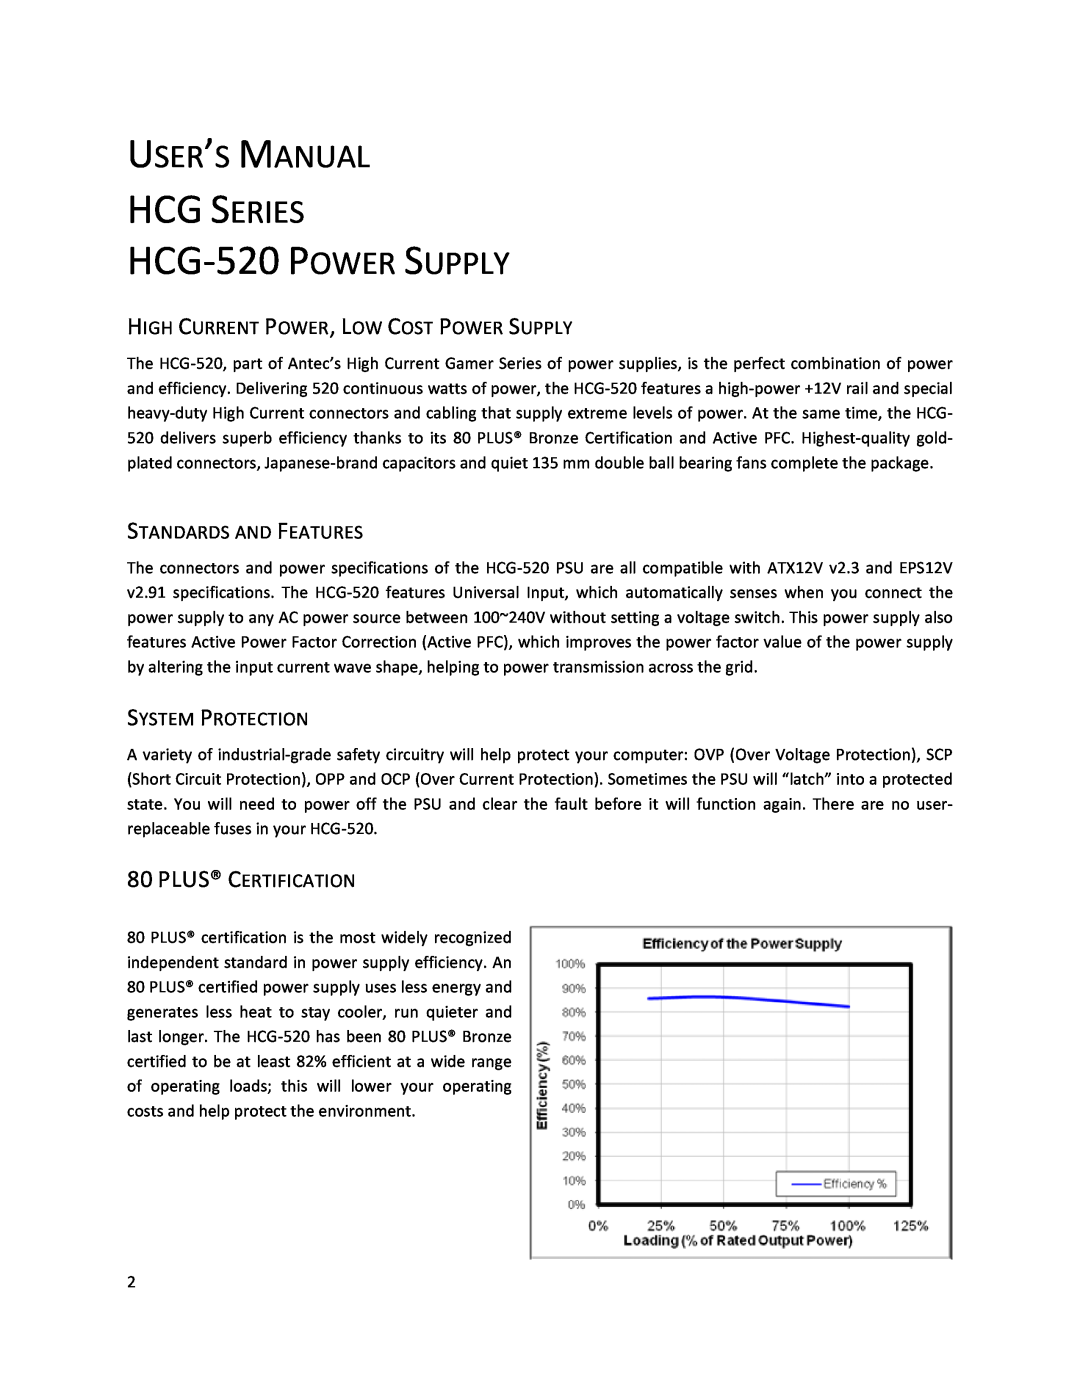 Antec HCG SERIES HCG-520 POWER SUPPLY, High Current Power, Low Cost Power Supply, Standards And Features, User’S Manual 